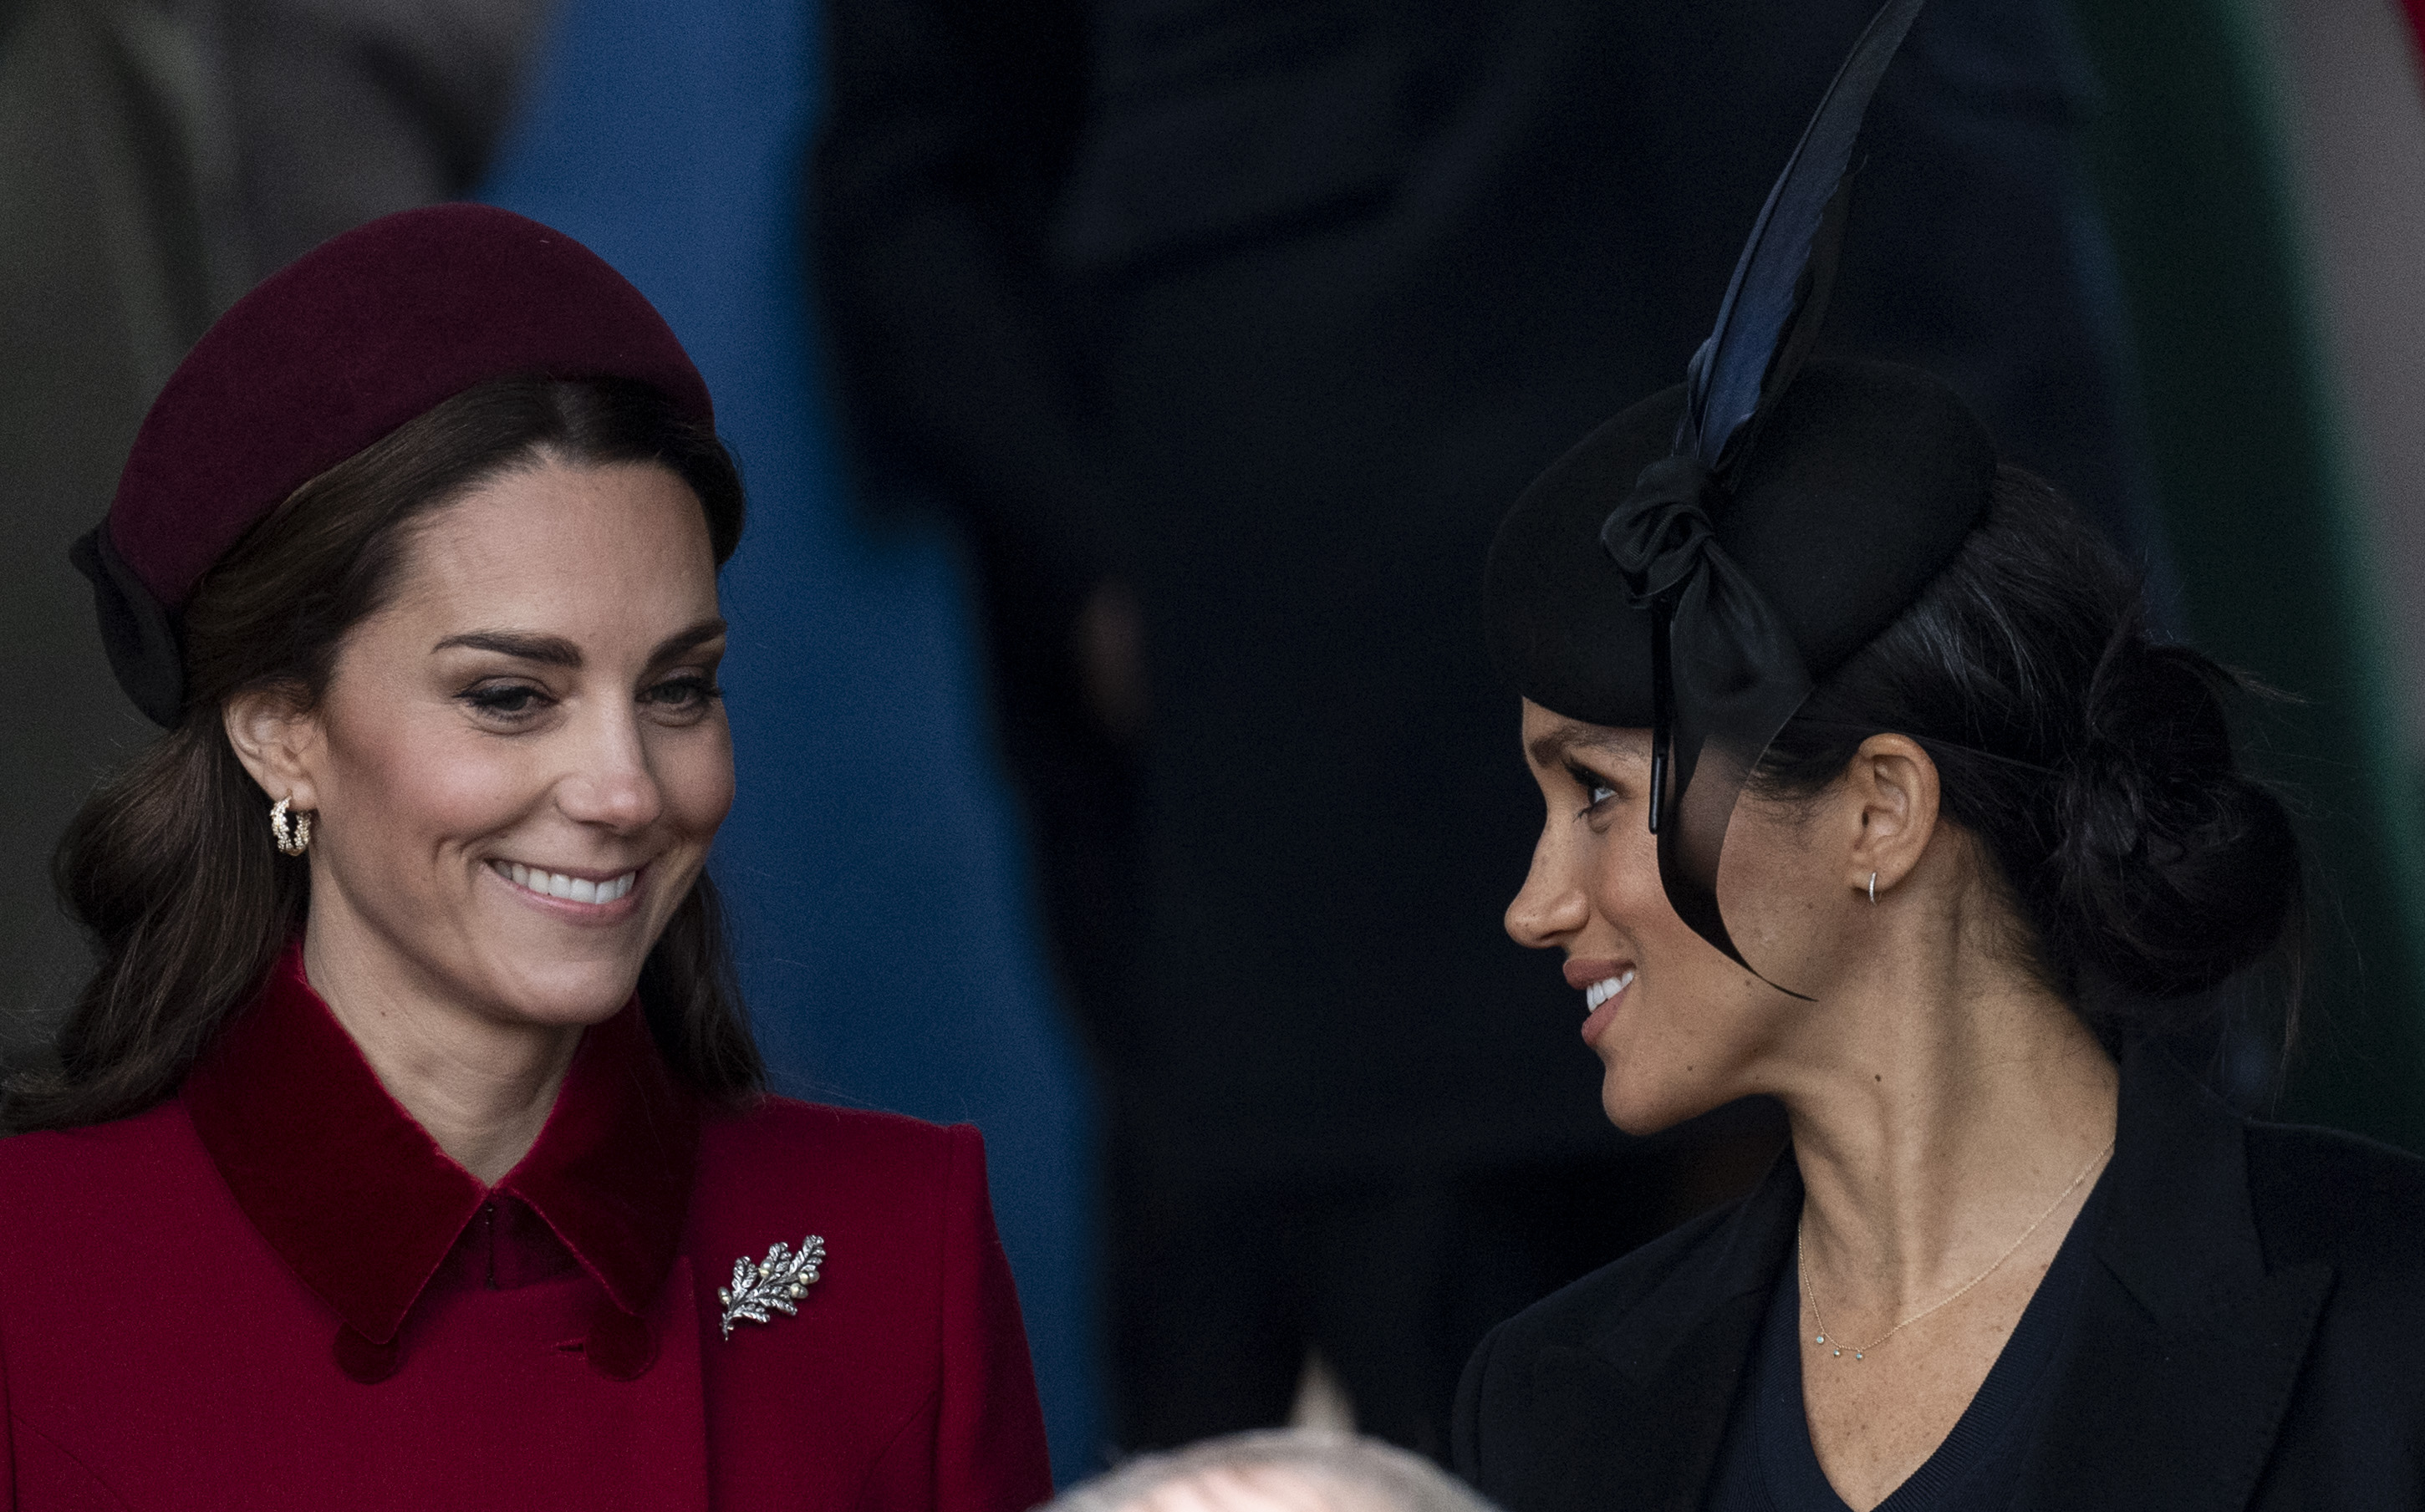 Princess Catherine and Meghan Markle at the Christmas Day Church service at Church of St Mary Magdalene on the Sandringham estate on December 25, 2018 | Source: Getty Images